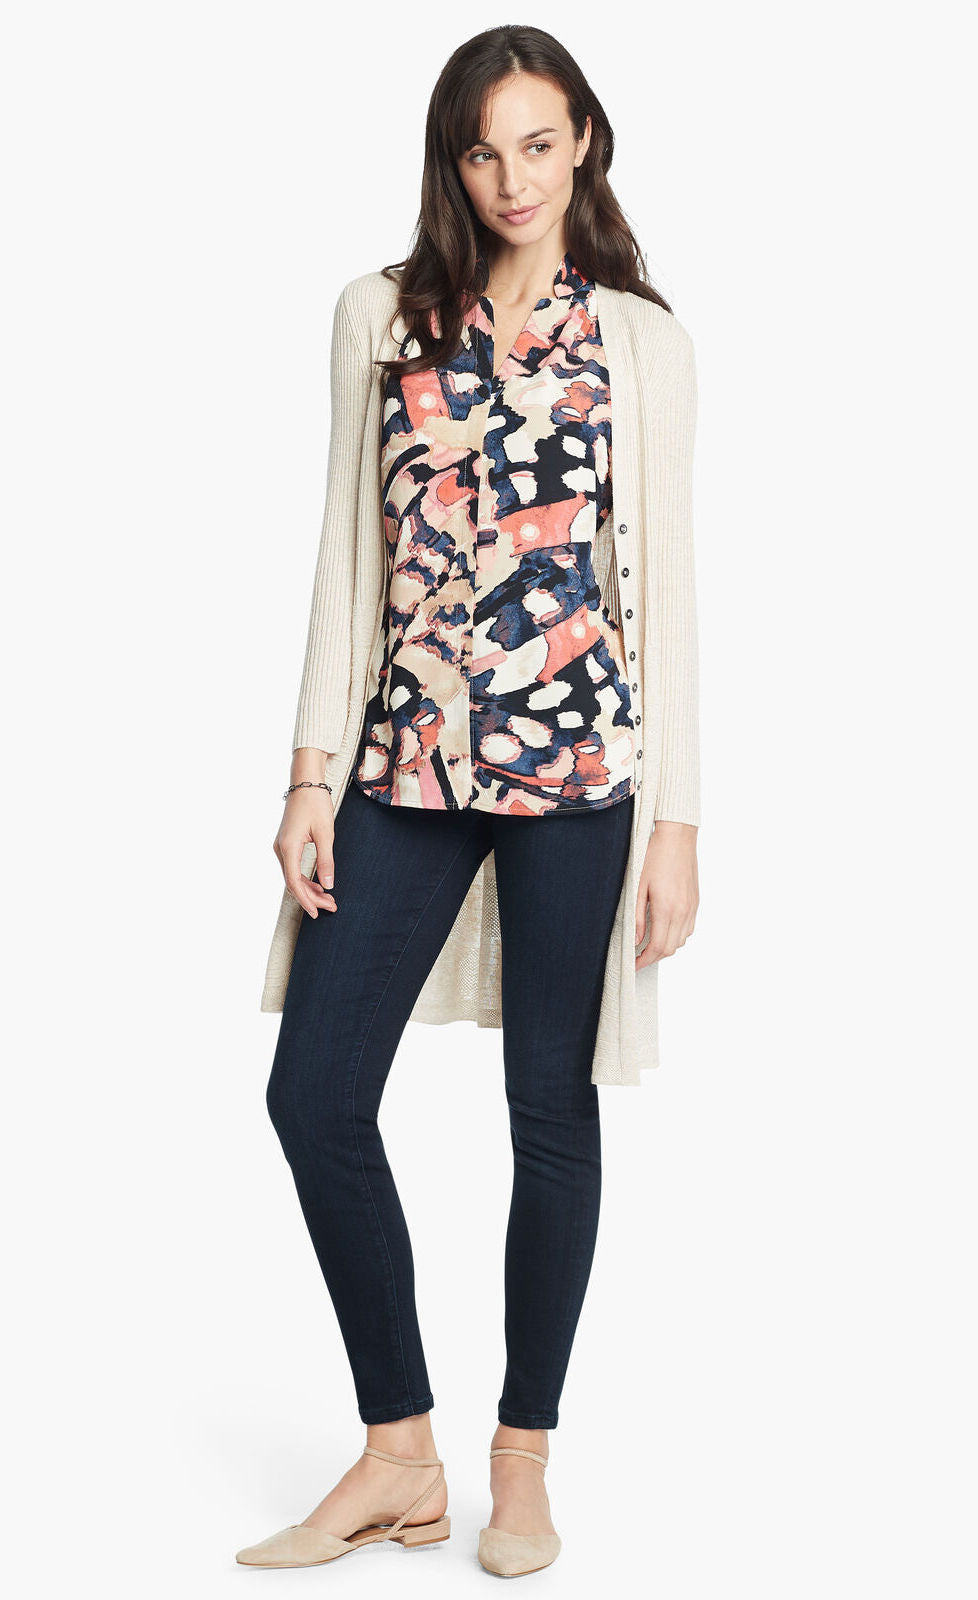 Front, full body view of a woman wearing the nic+zoe all aflutter tank under a long beige cardigan with skinny denim pants. The sleeveless tank features an abstract indigo and mixed pink print and a v-neck.